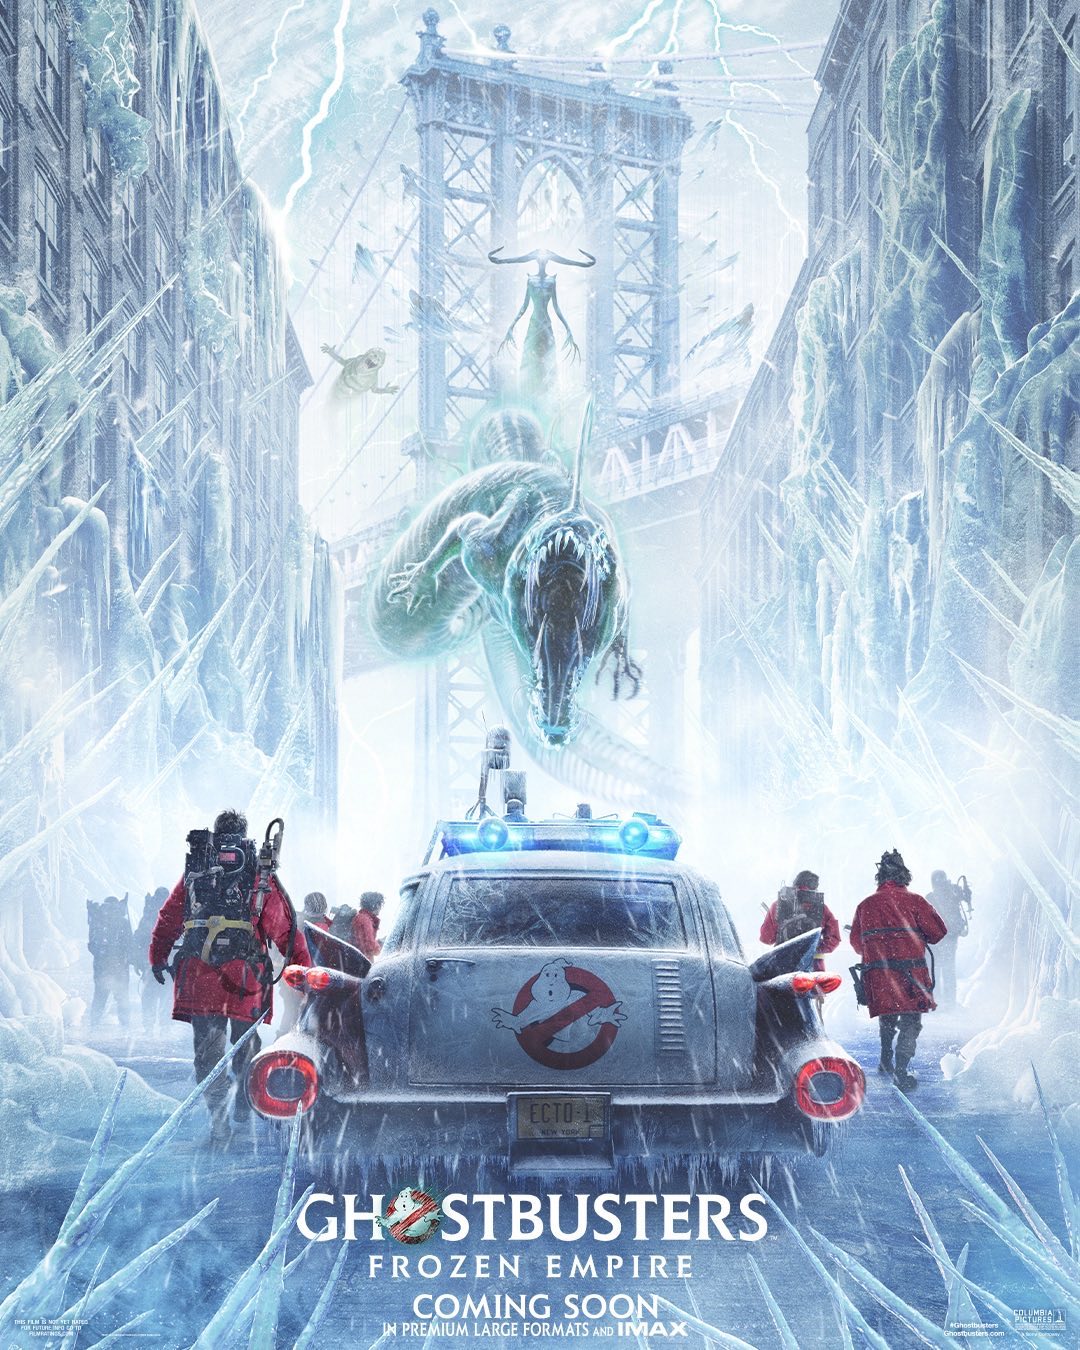 Ghostbusters Frozen Empire Movie Poster